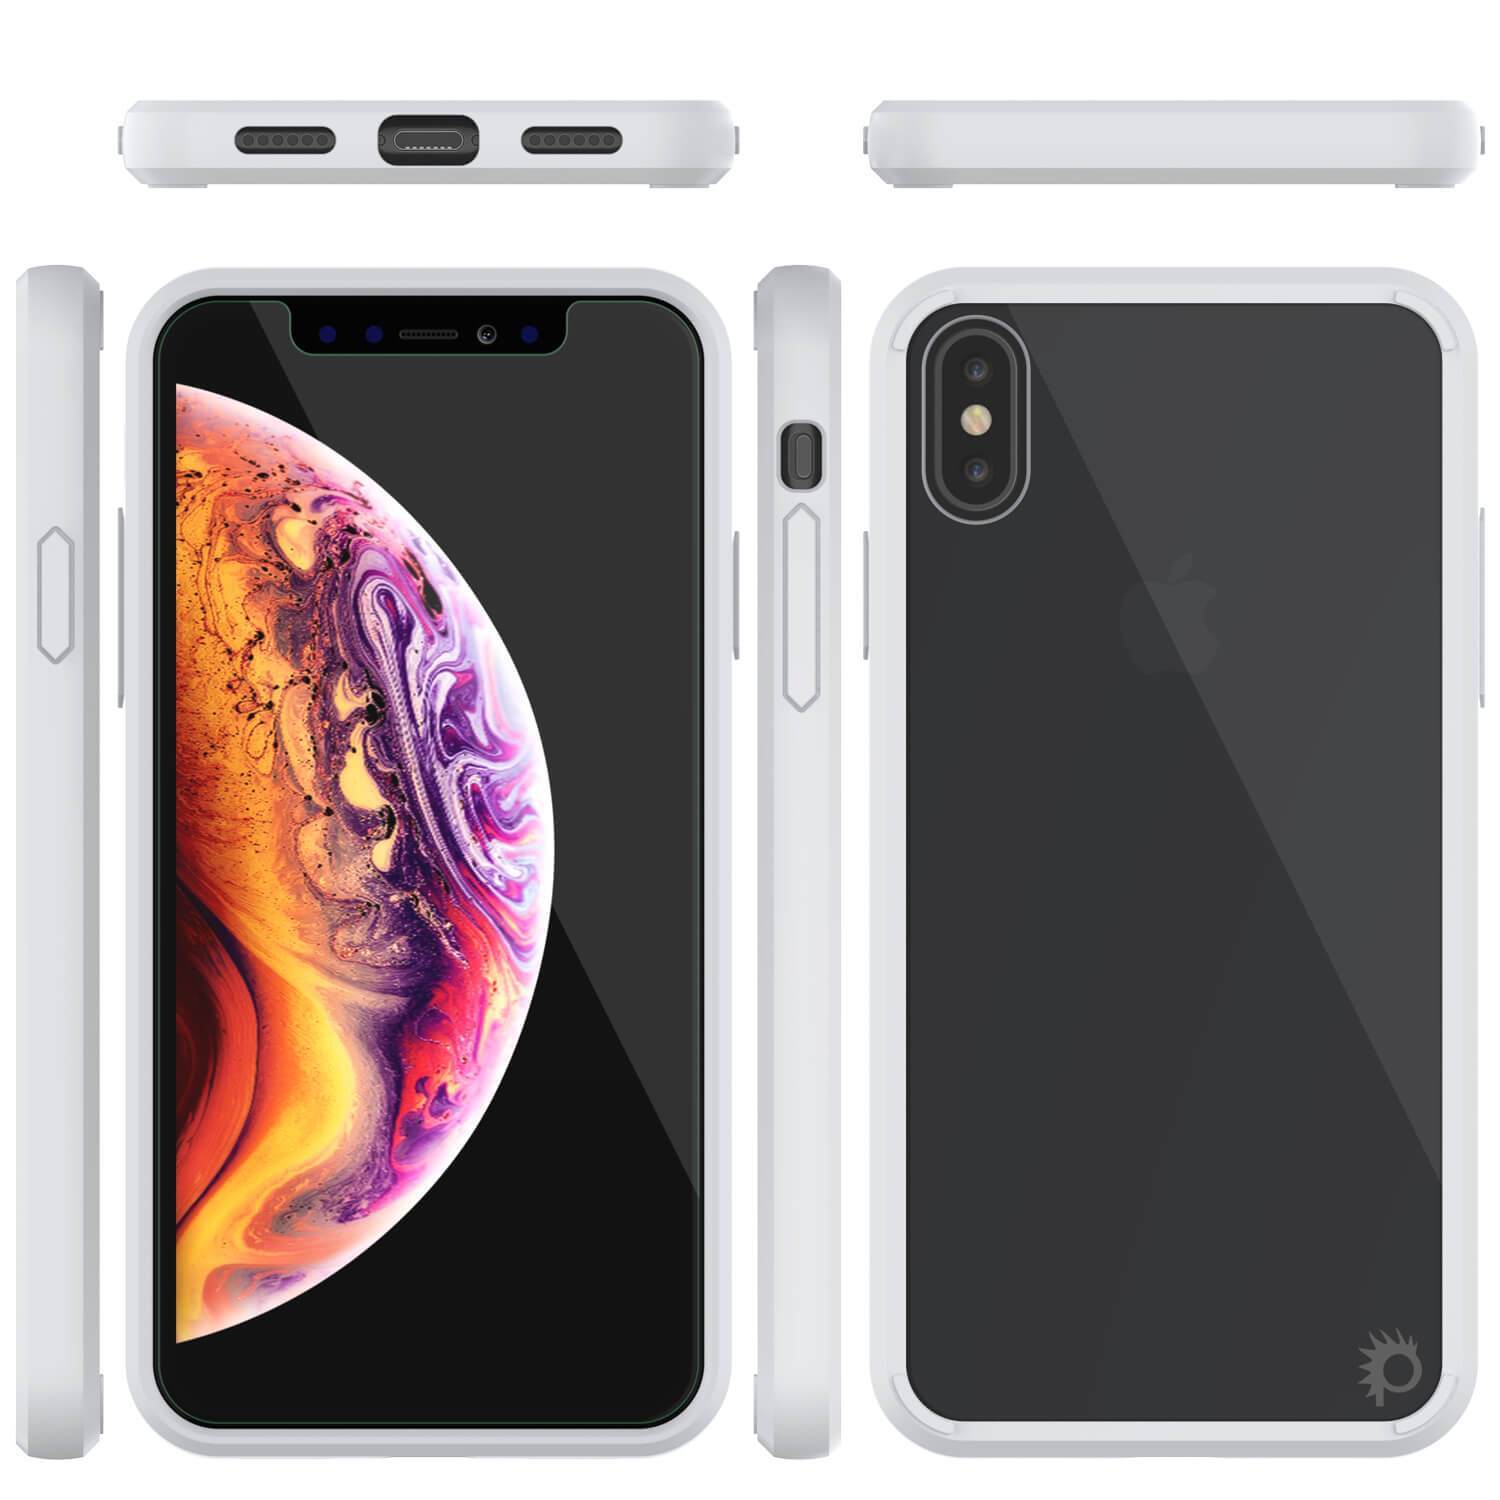 iPhone XS Case, PUNKcase [Lucid 2.0 Series] [Slim Fit] Armor Cover [White]